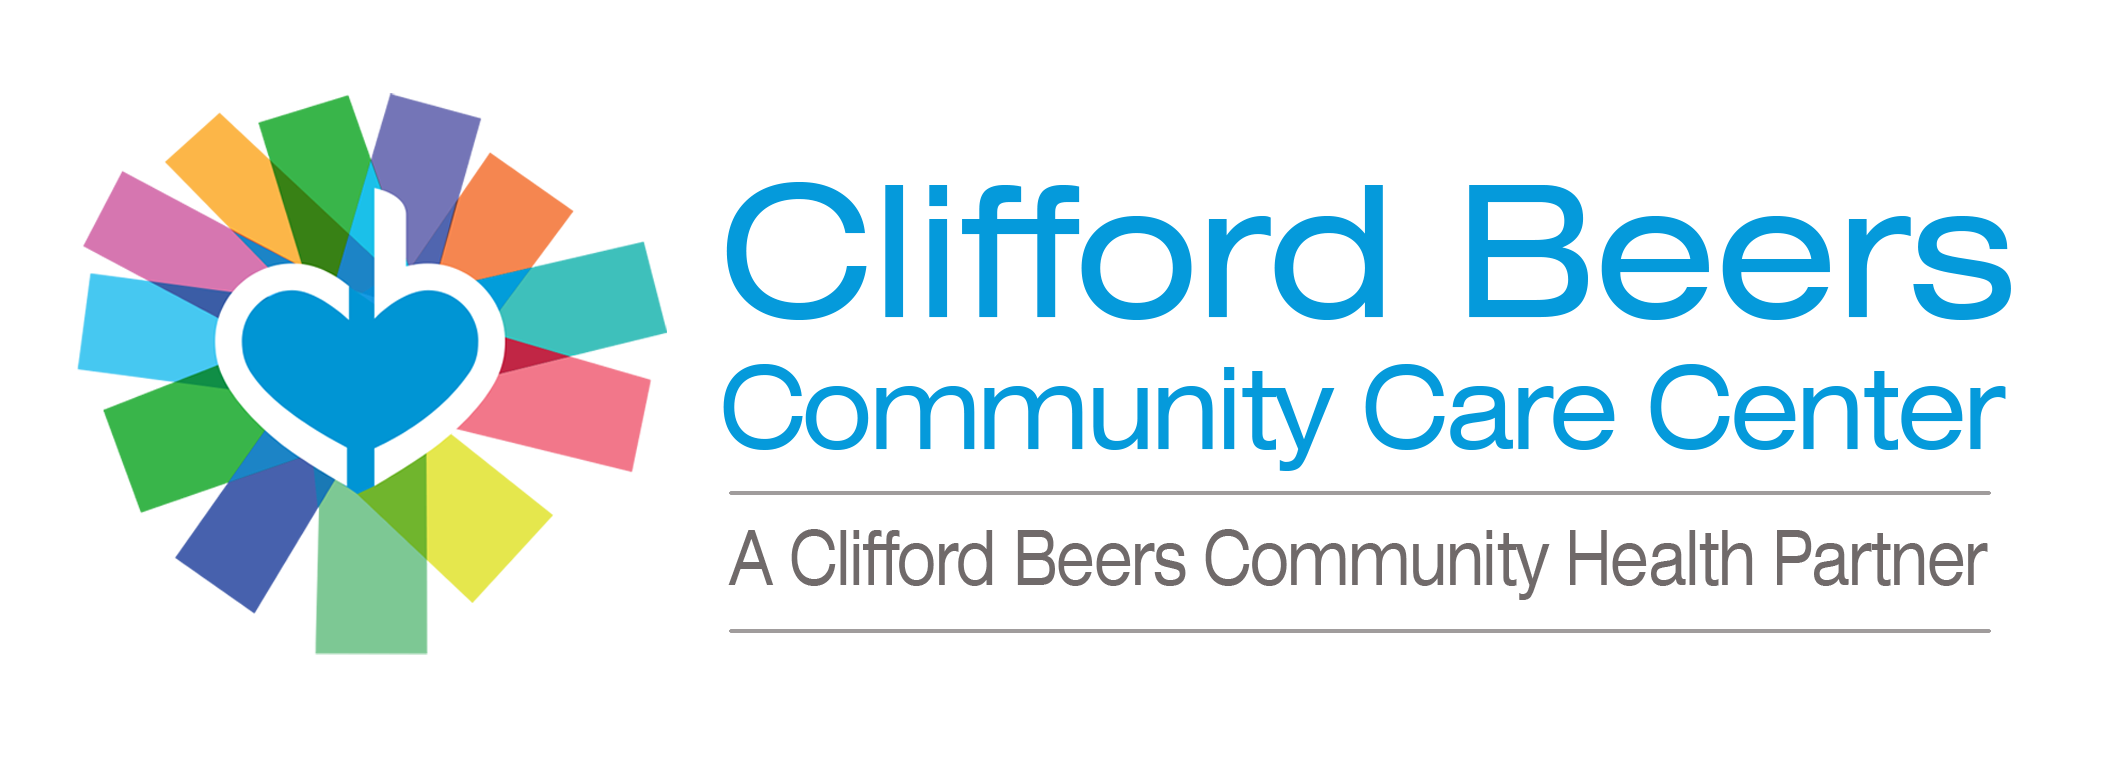 Clifford Beers Community Care Center: A Clifford Beers Community Health Partner